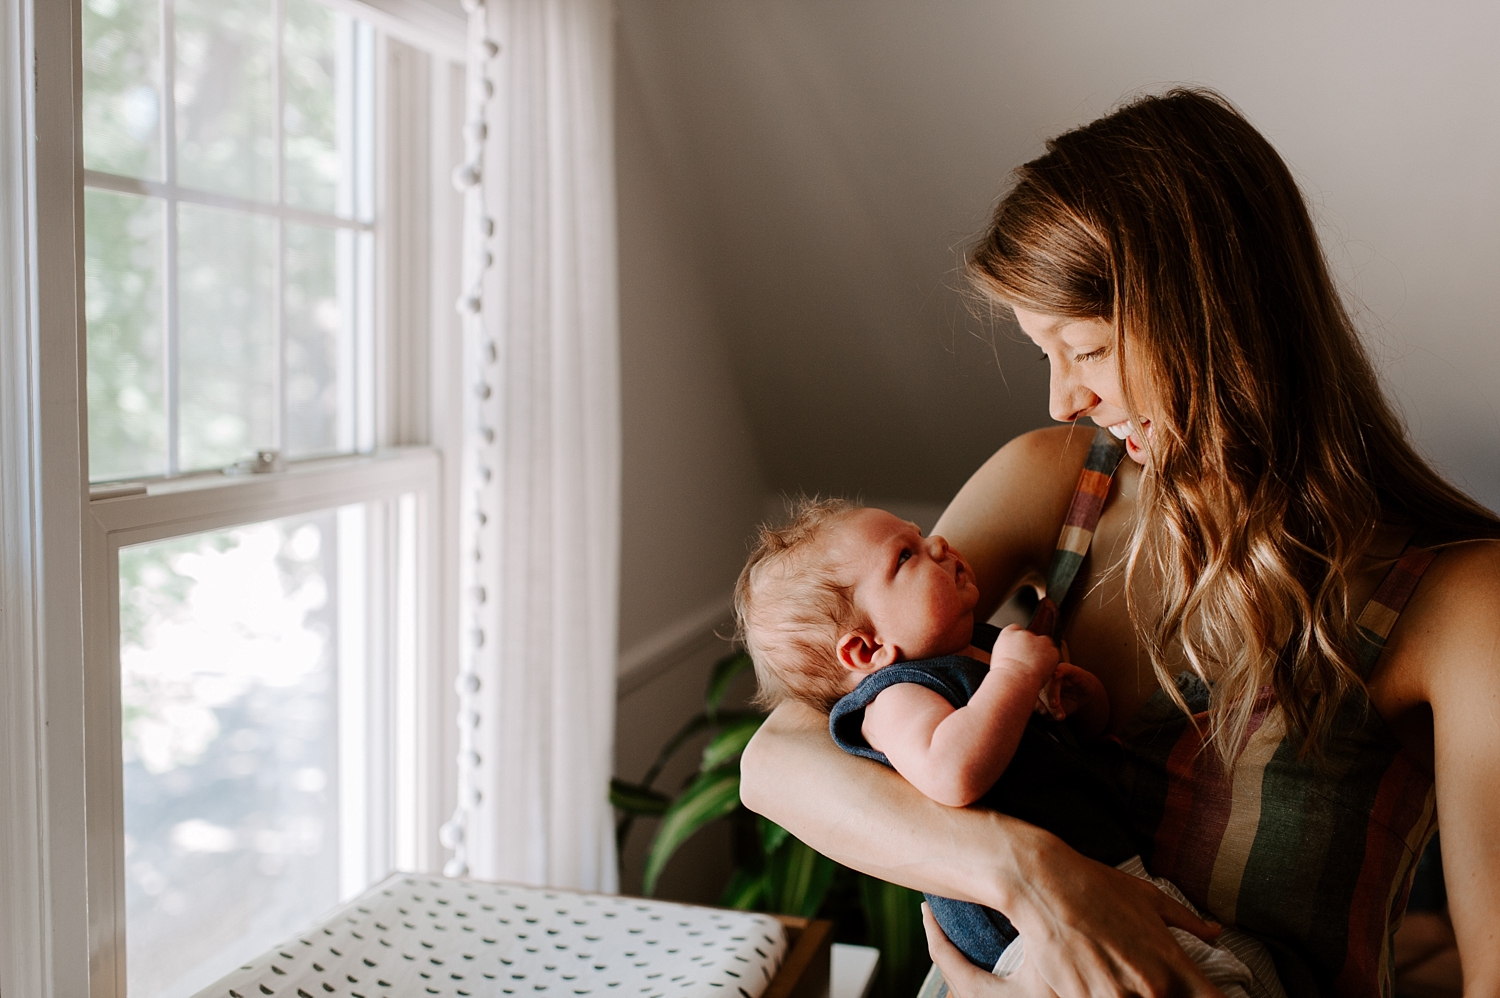 In home lifestyle newborn session with Lifestyle Newborn Photographer, Meg Newton Photography